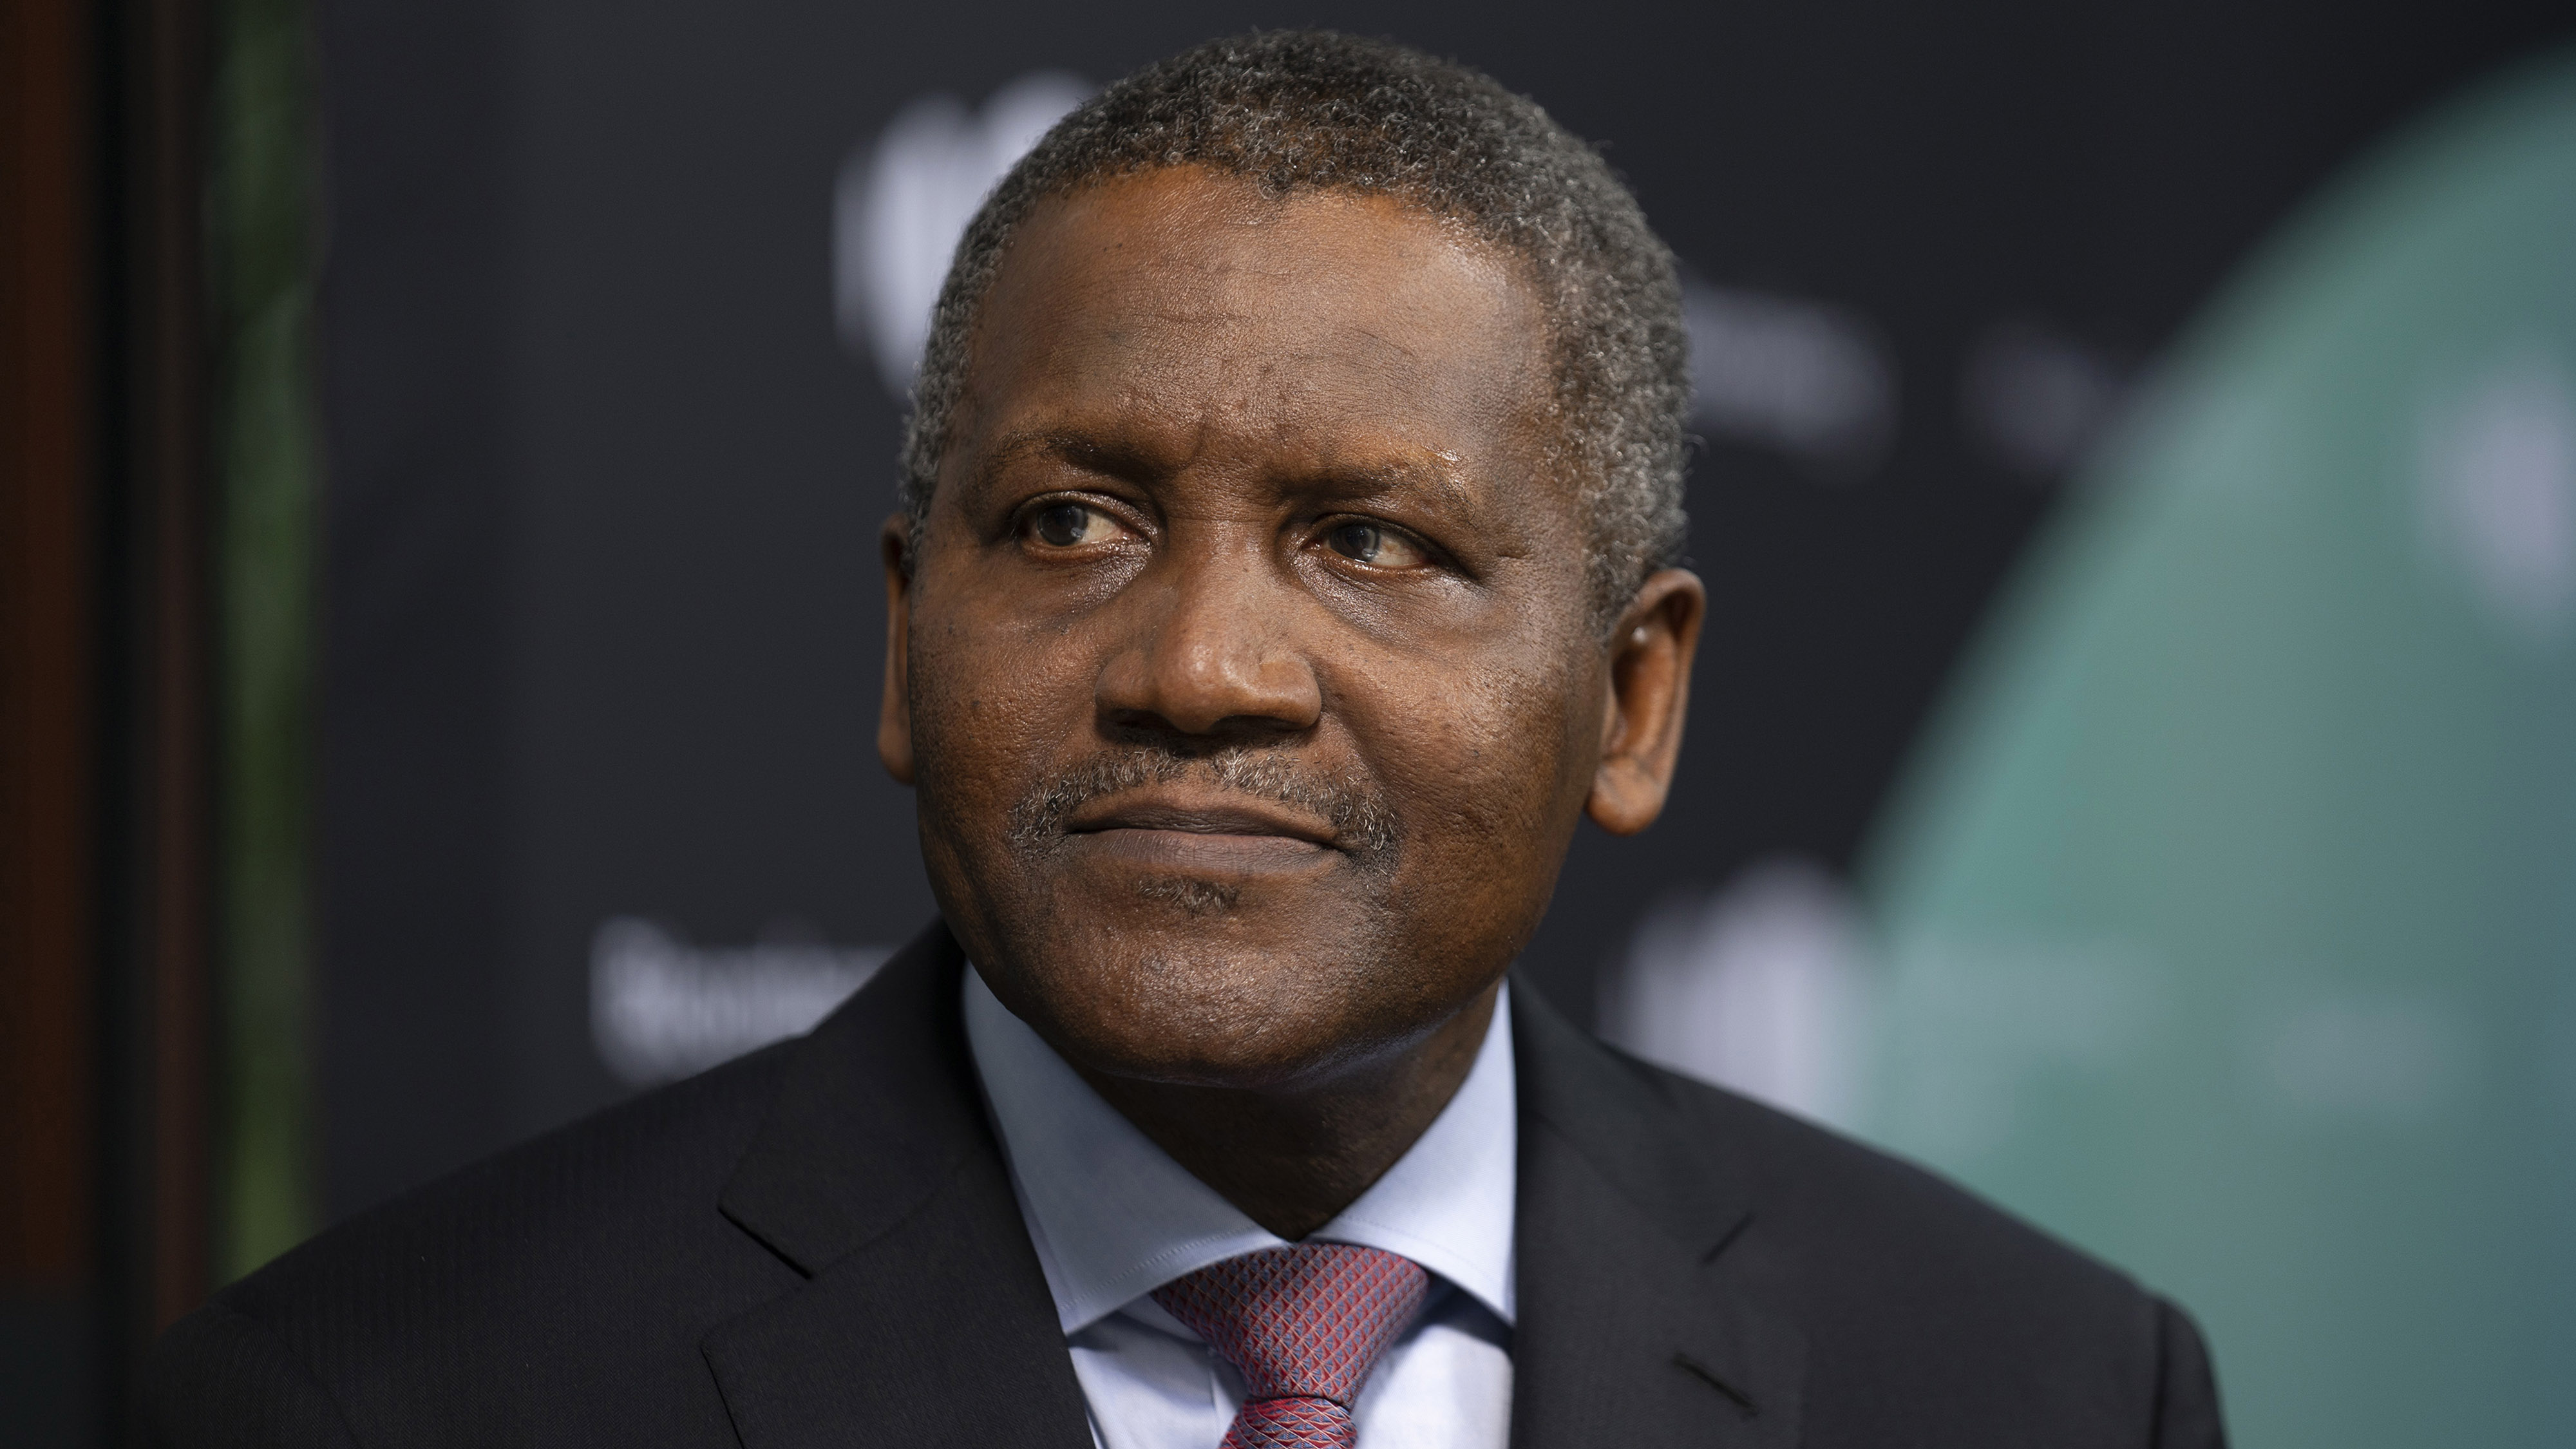 Aliko Dangote, Africa's Richest Man, Says He Built His Fortune From